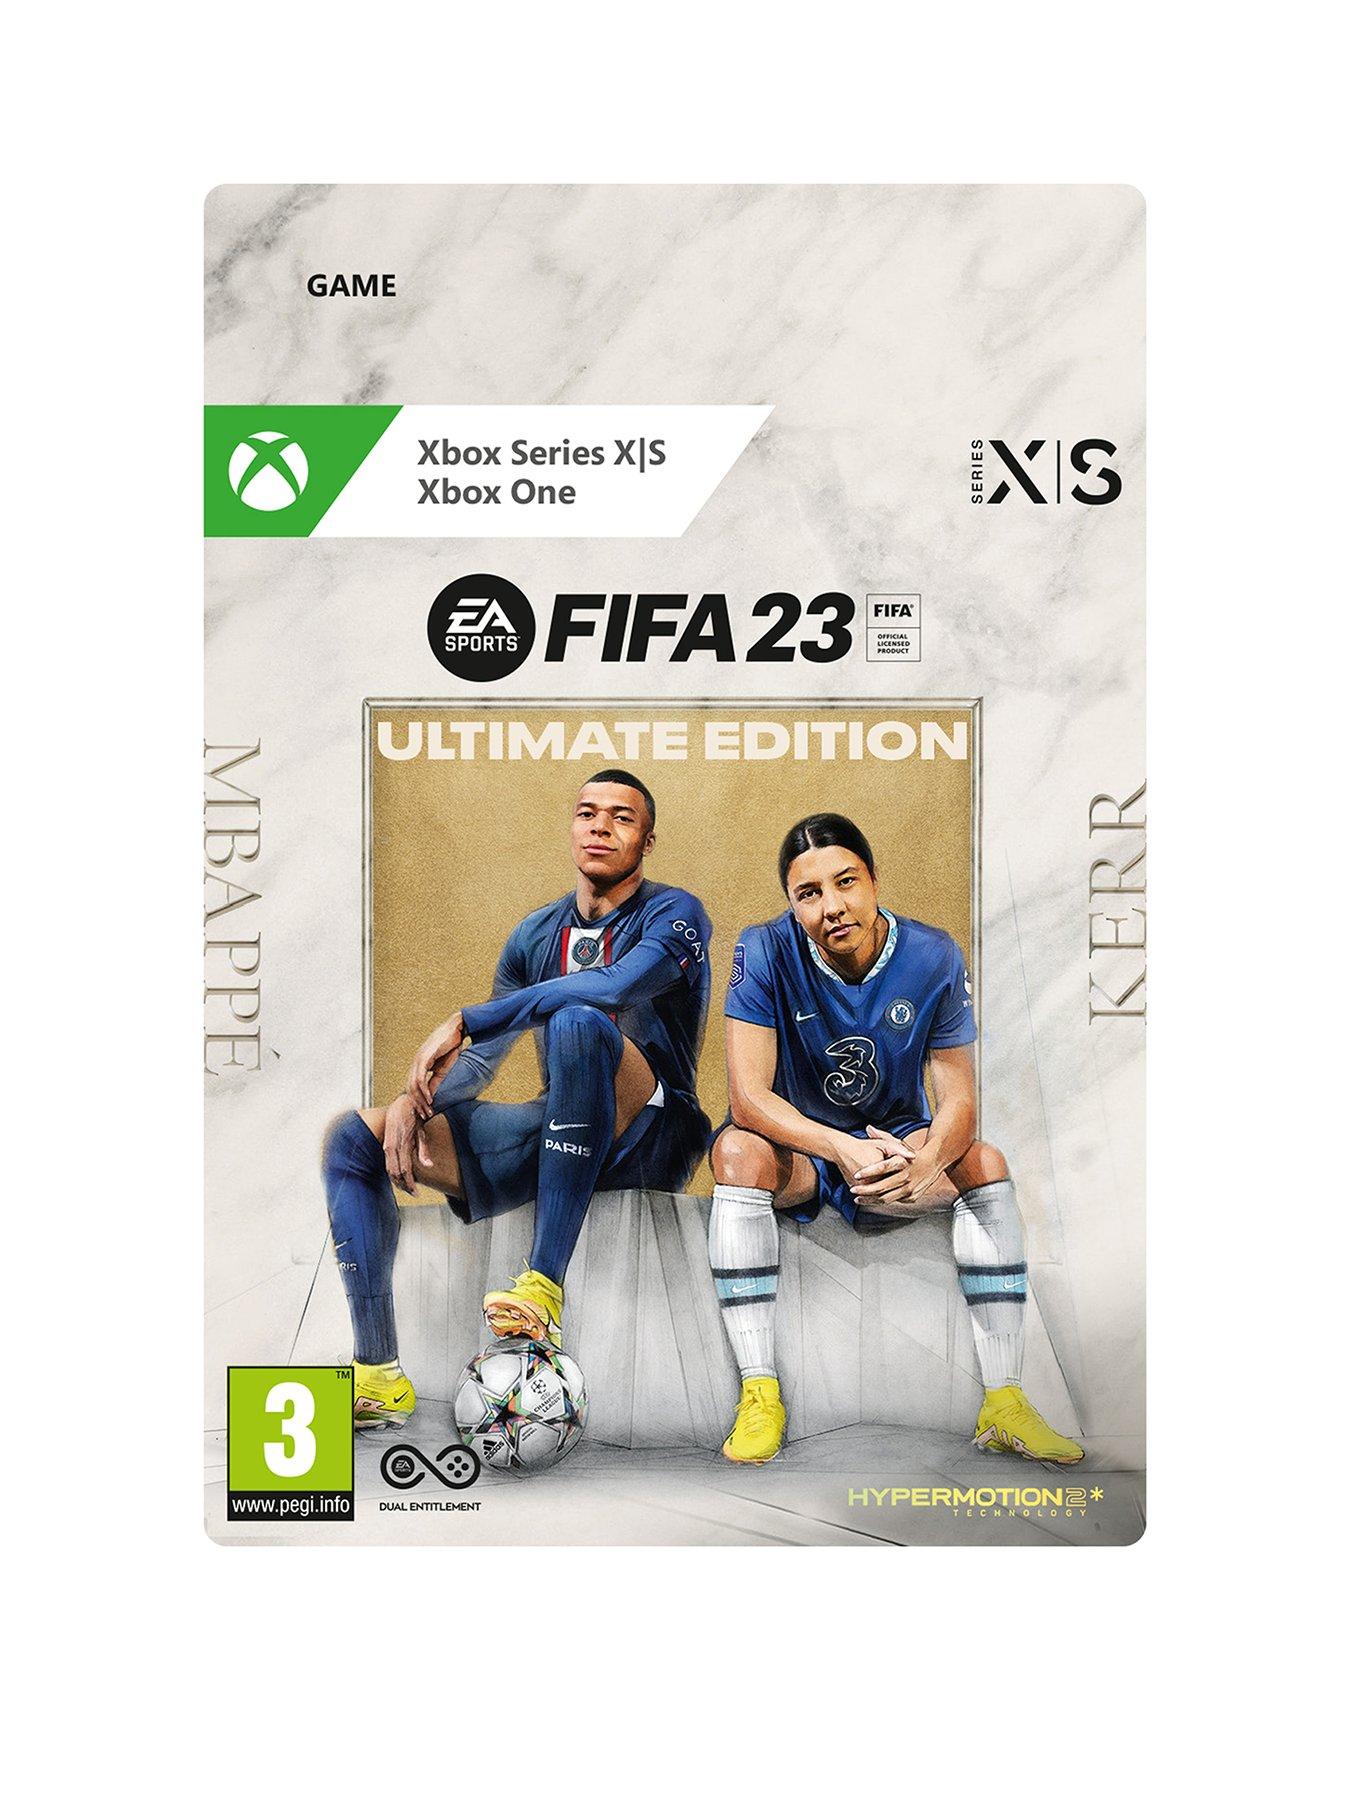 FIFA 22 Ultimate Edition PC Game DVD Disks + Free Gift